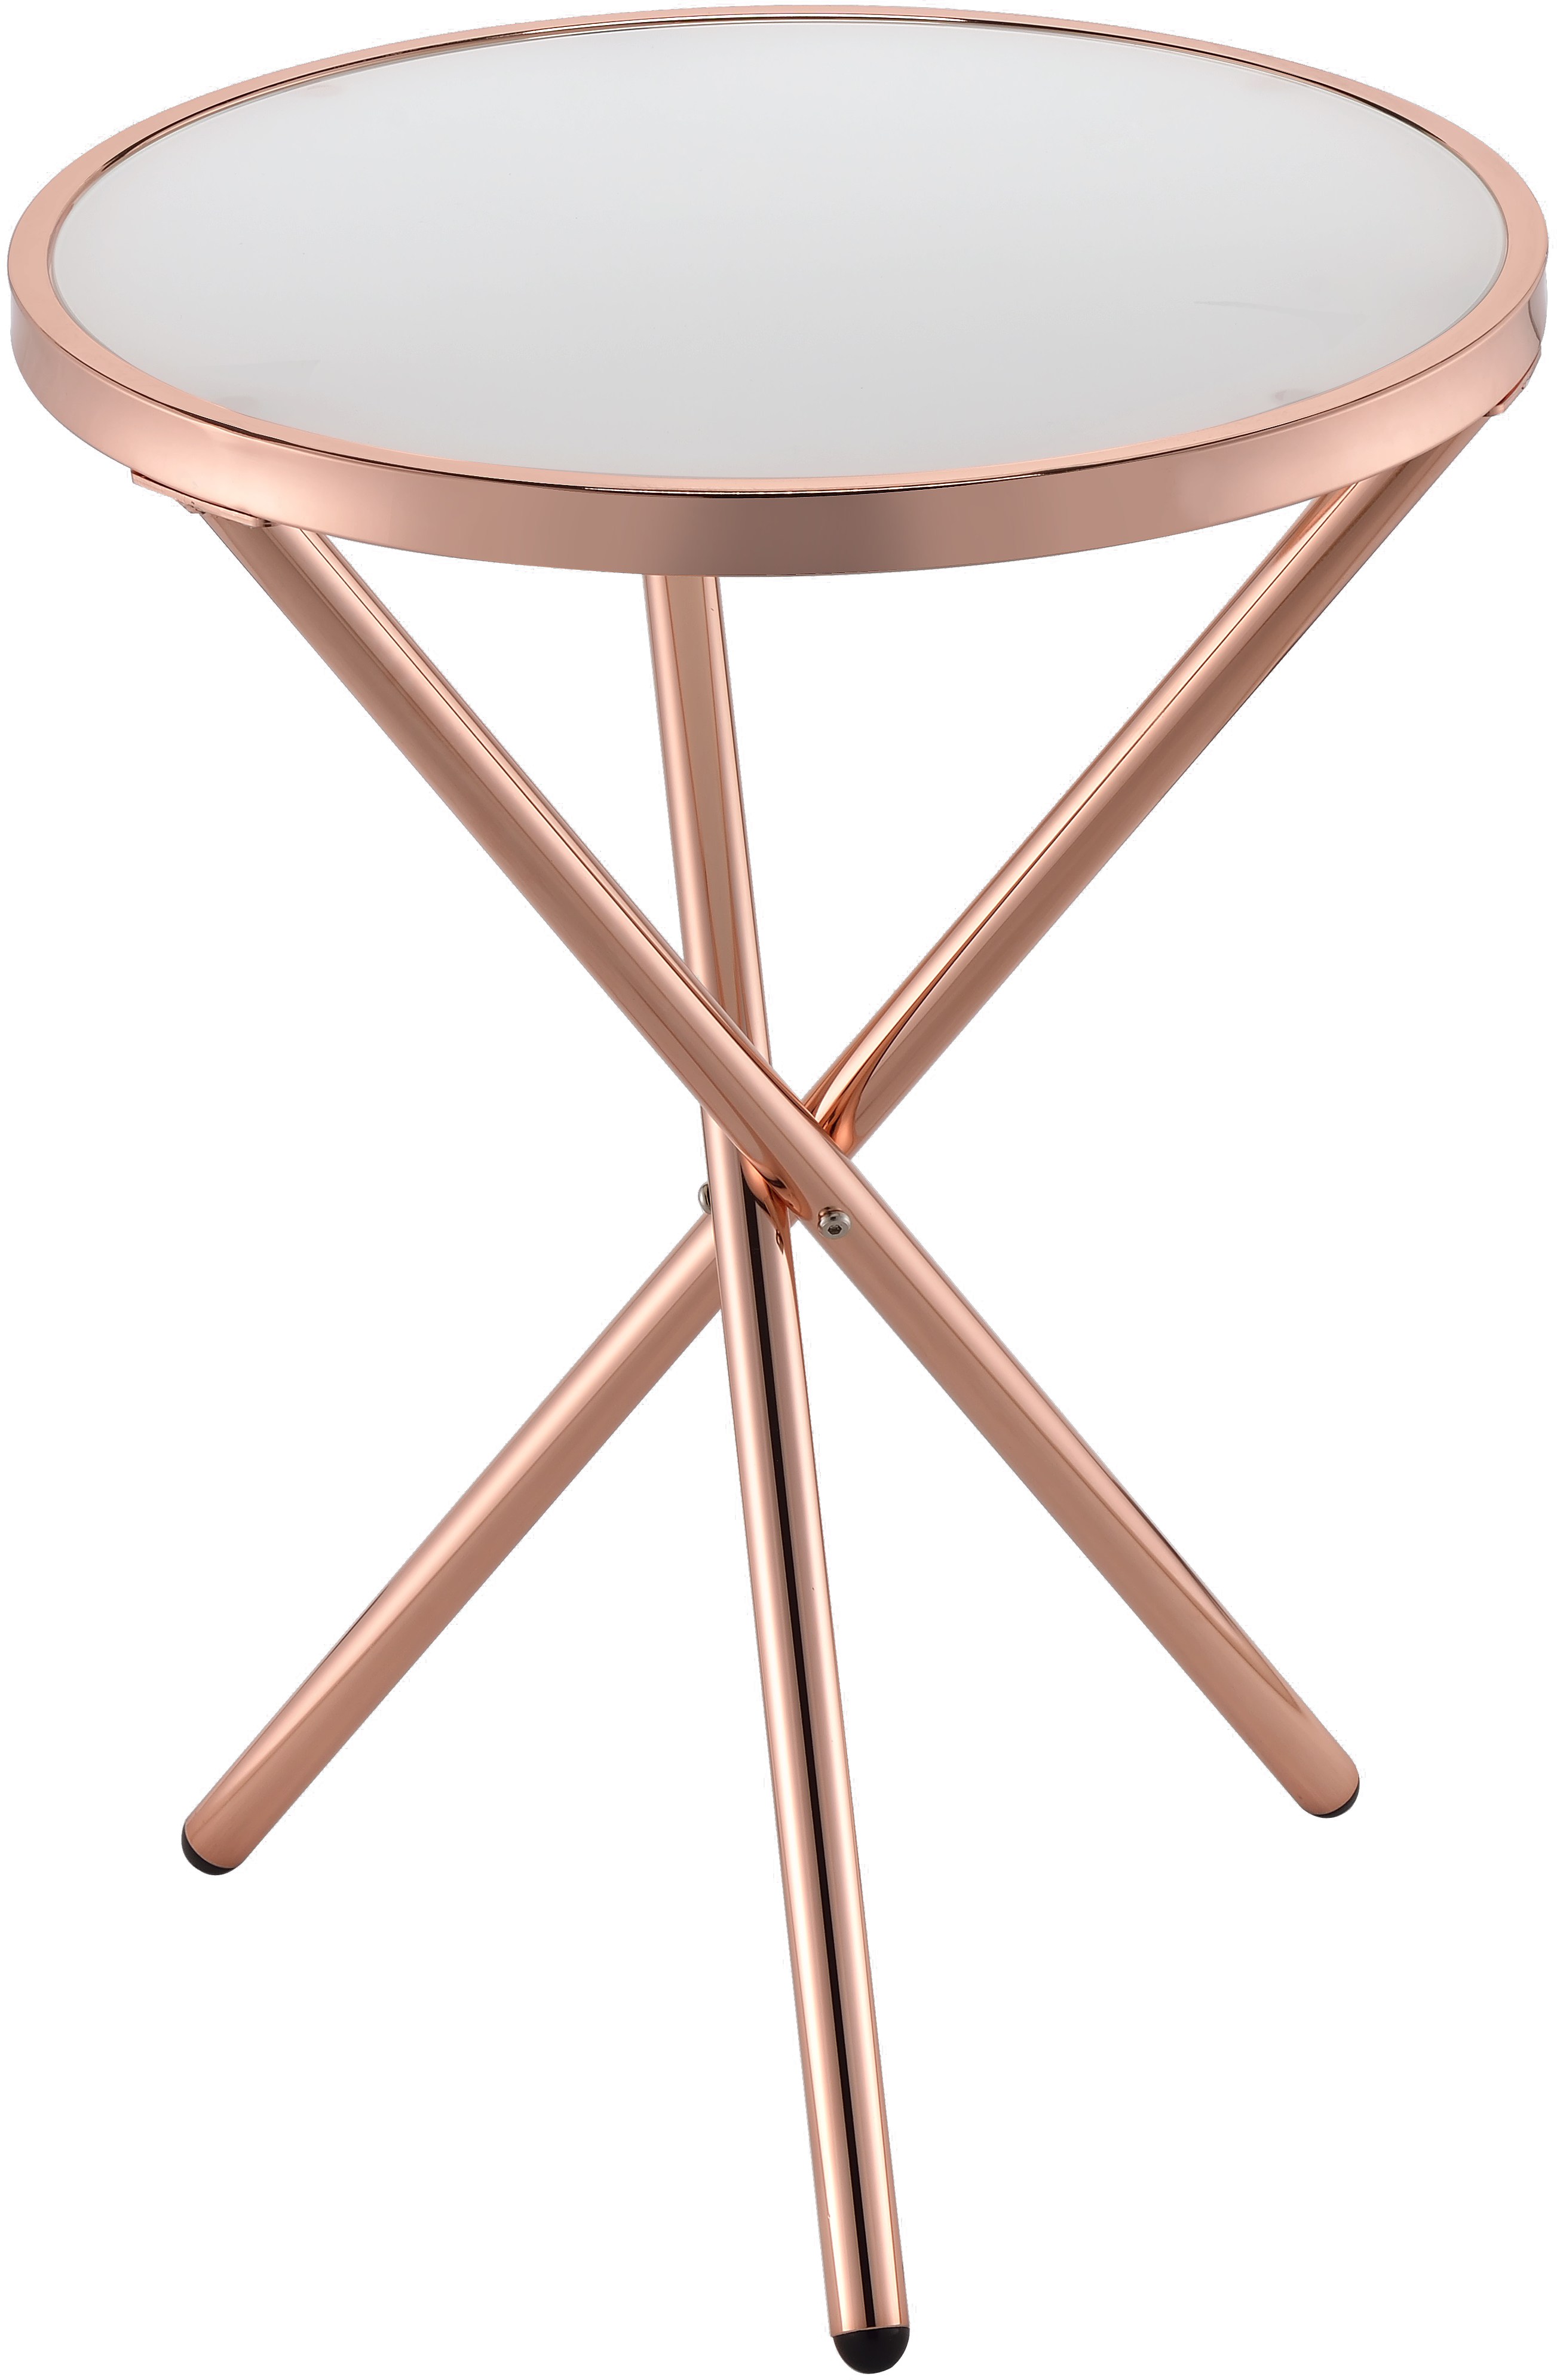 lajita rose gold accent table tables rosegold chinese jar lamps safavieh target mirrored side with drawer very narrow hall chairs coffee legs slide bolt latch office contemporary